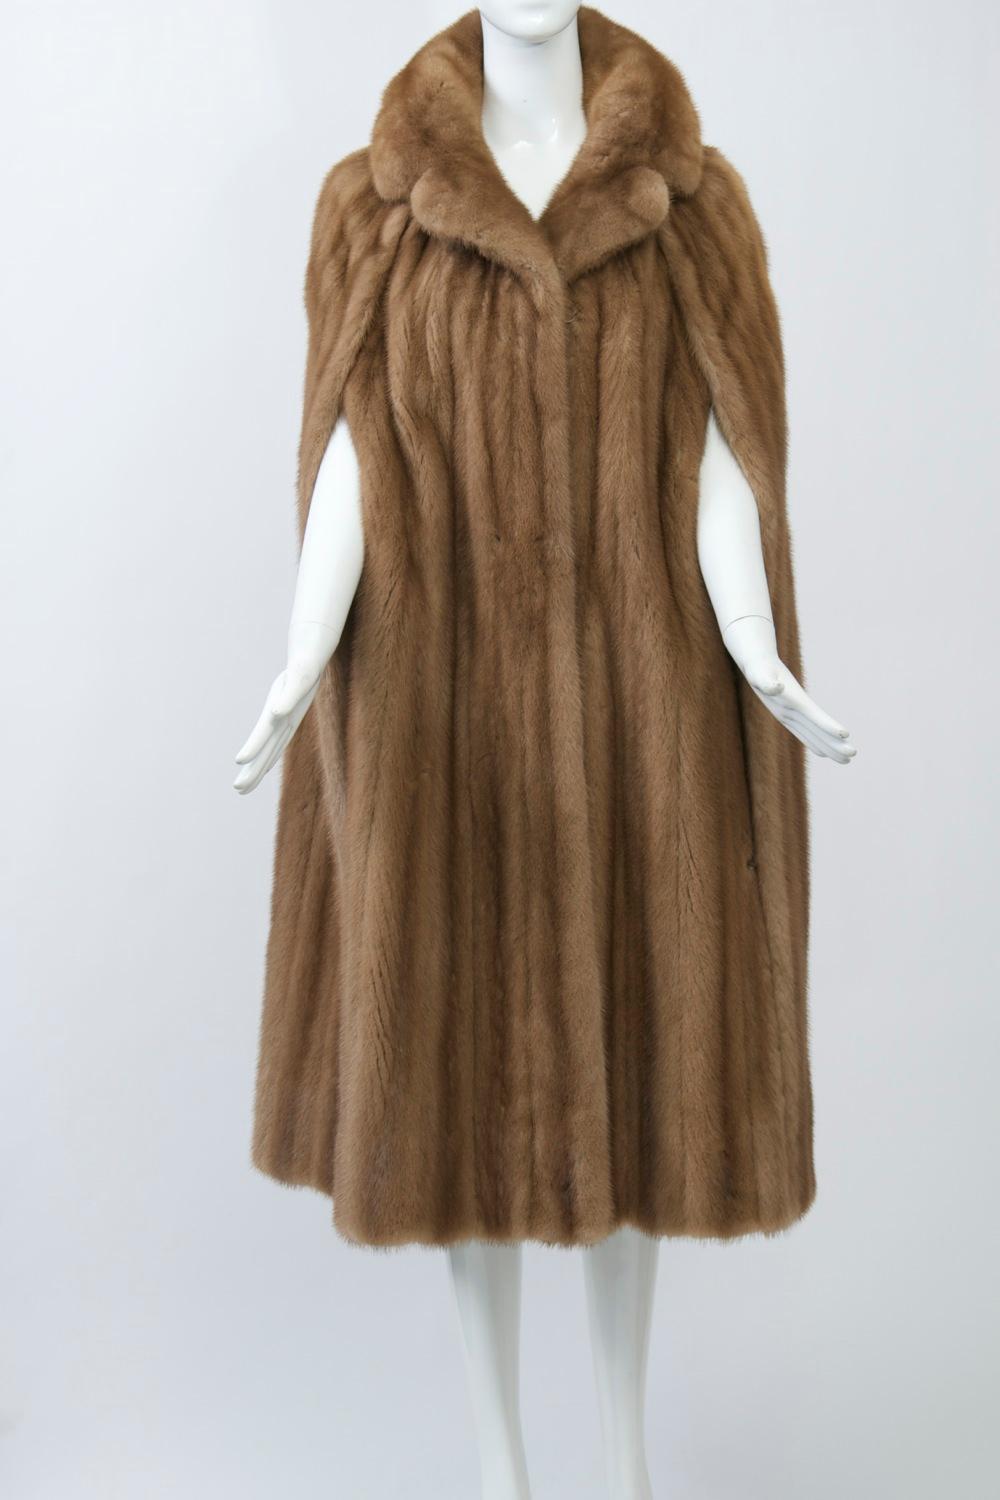 Two of my favorite things - capes and mink, combined into one fantastic piece. Fashioned of autumn haze mink, which is flattering and goes with everything, this cape has a notched collar and is slit down the sides, held in place by stitching across